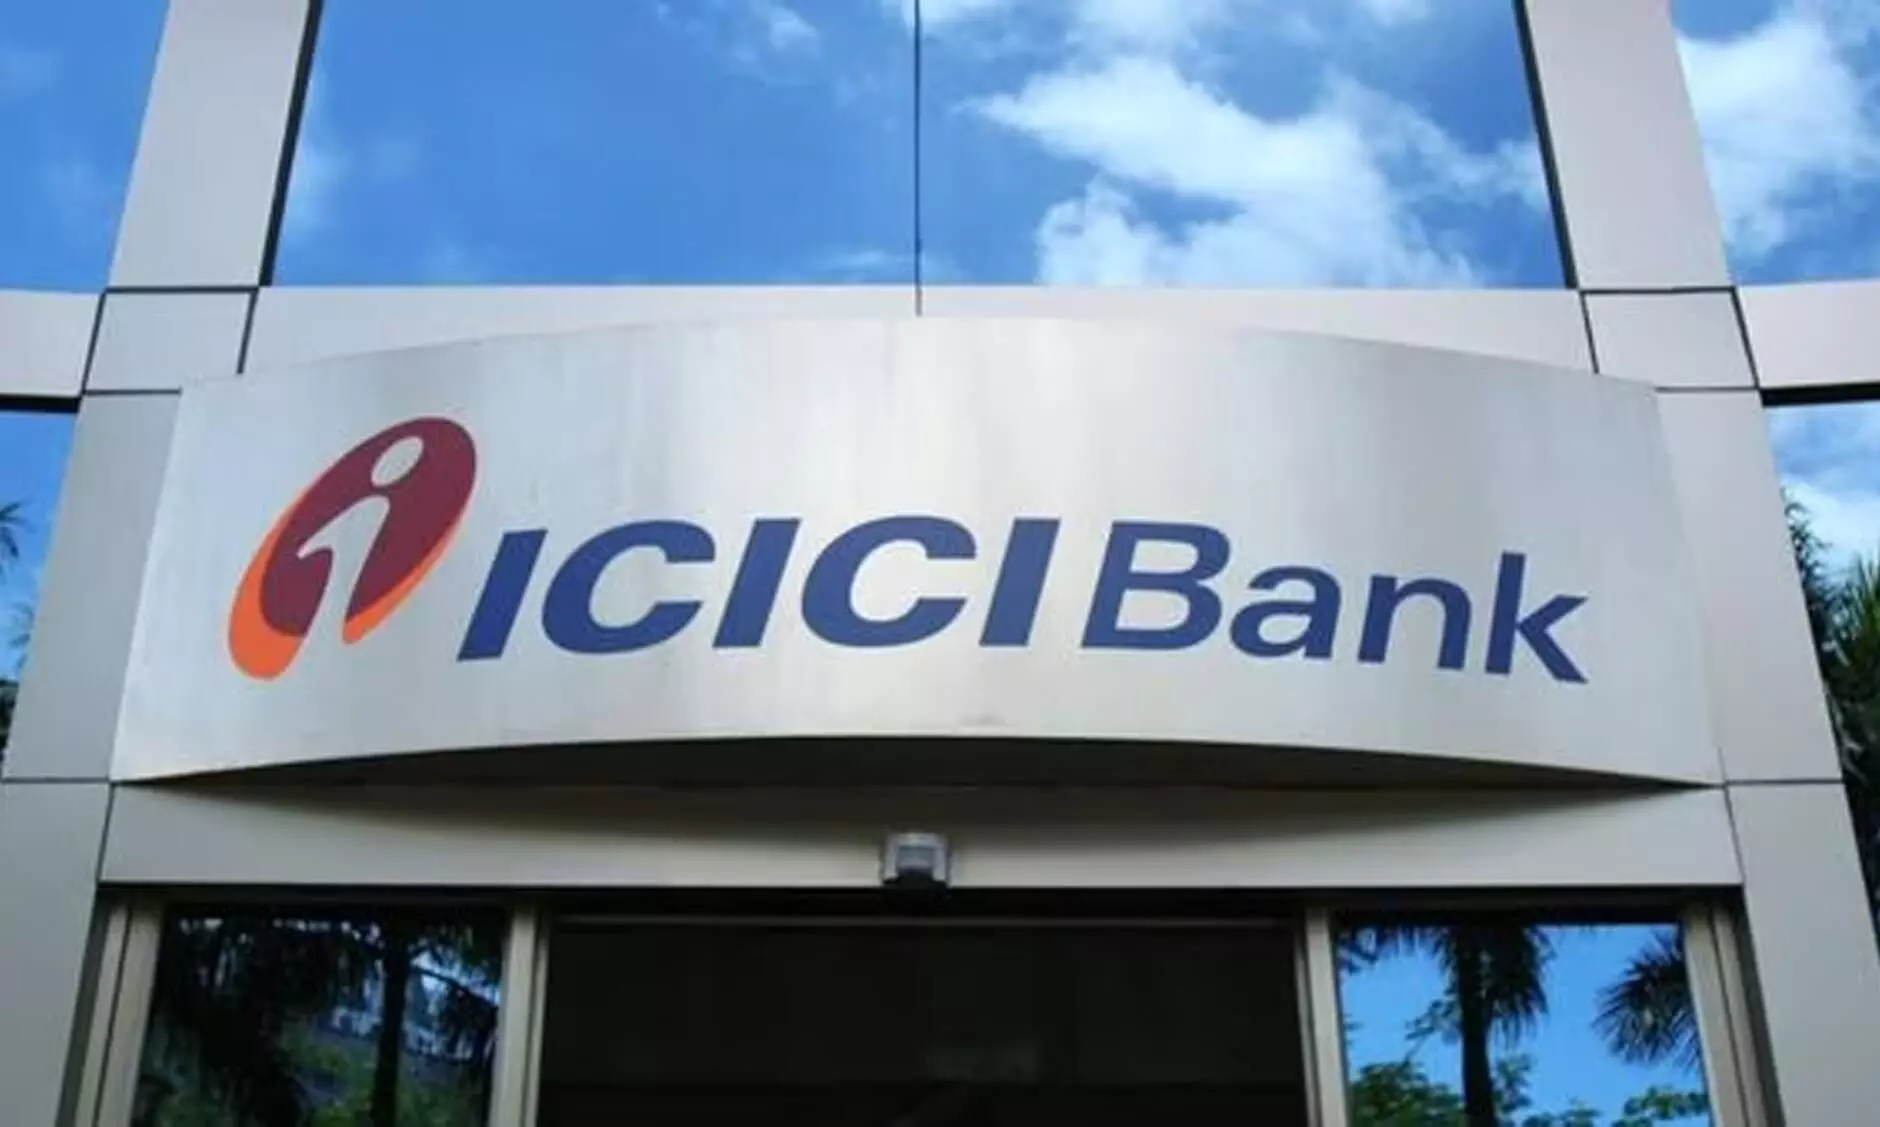 Helped by lower provisions, ICICI Bank’s March qtr net profit grows 18.5% to Rs 11,672 cr